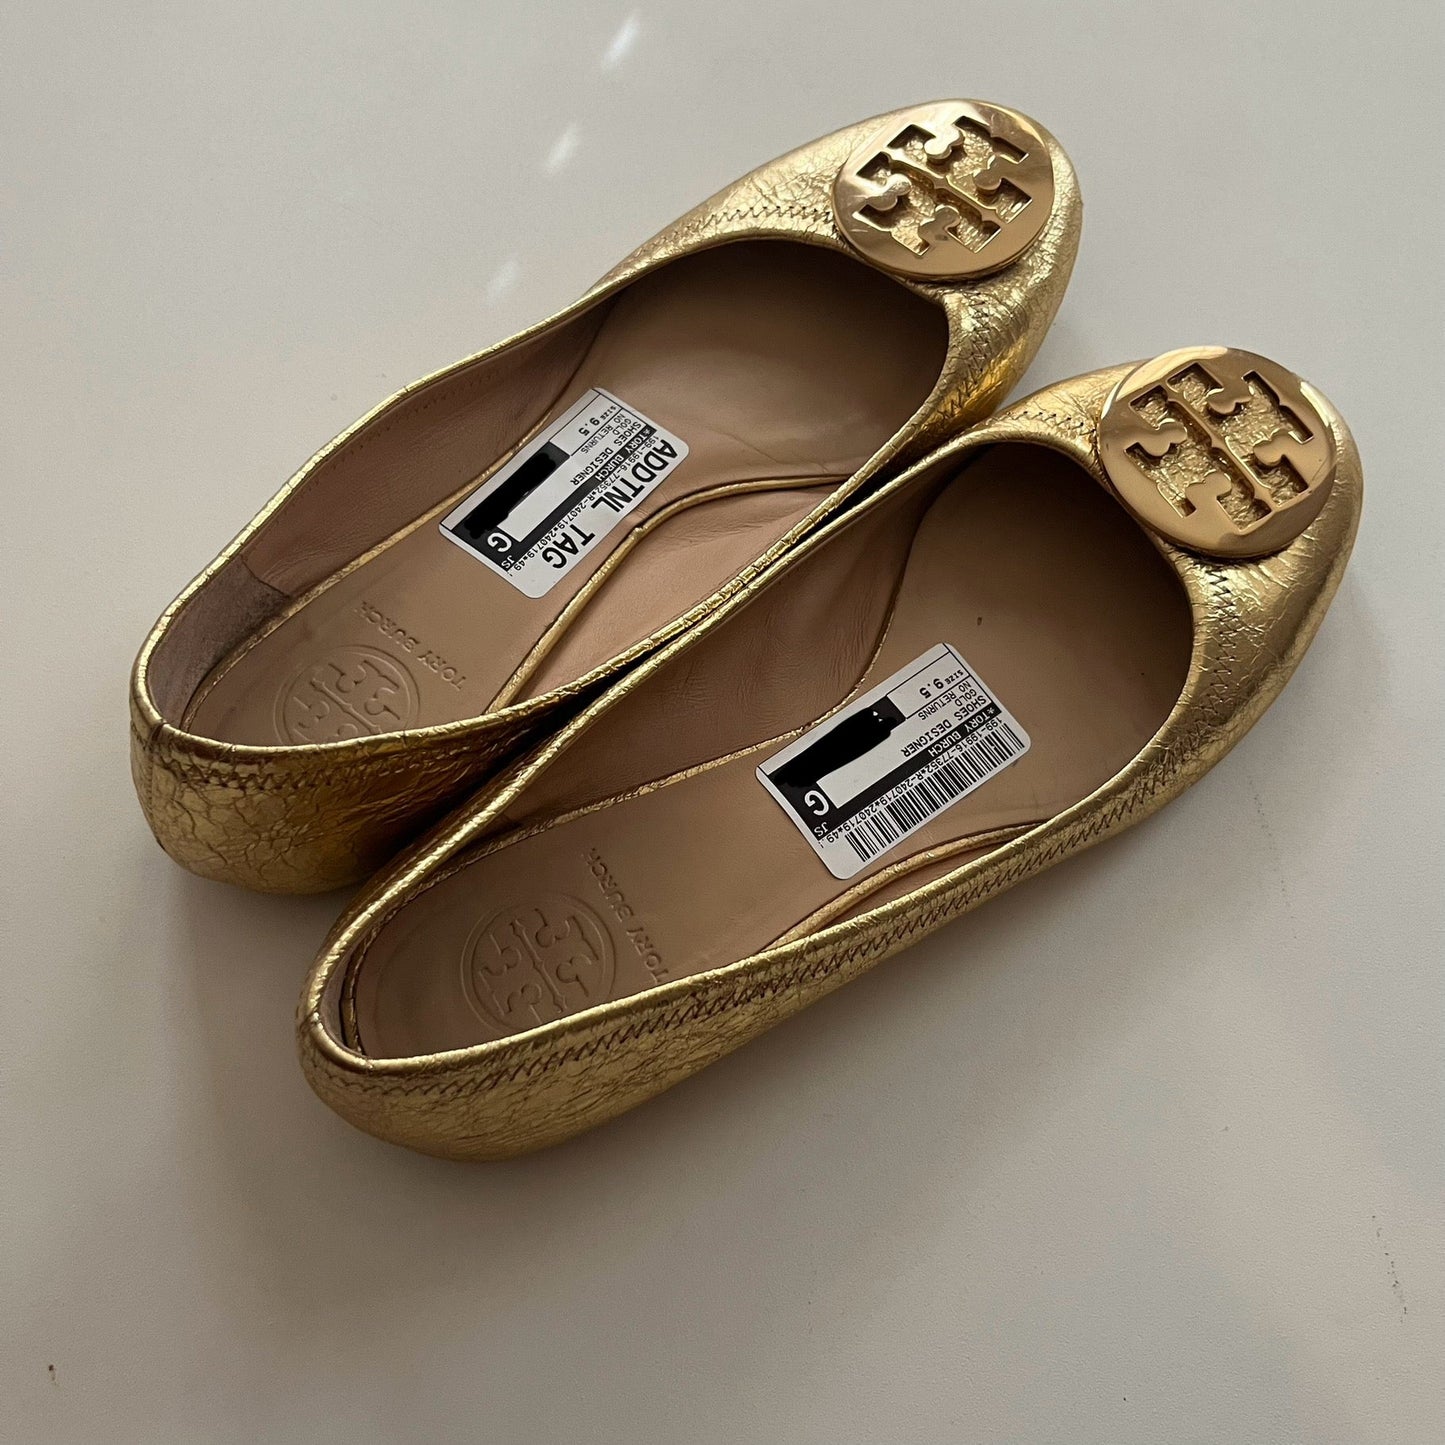 Gold Shoes Designer Tory Burch, Size 9.5